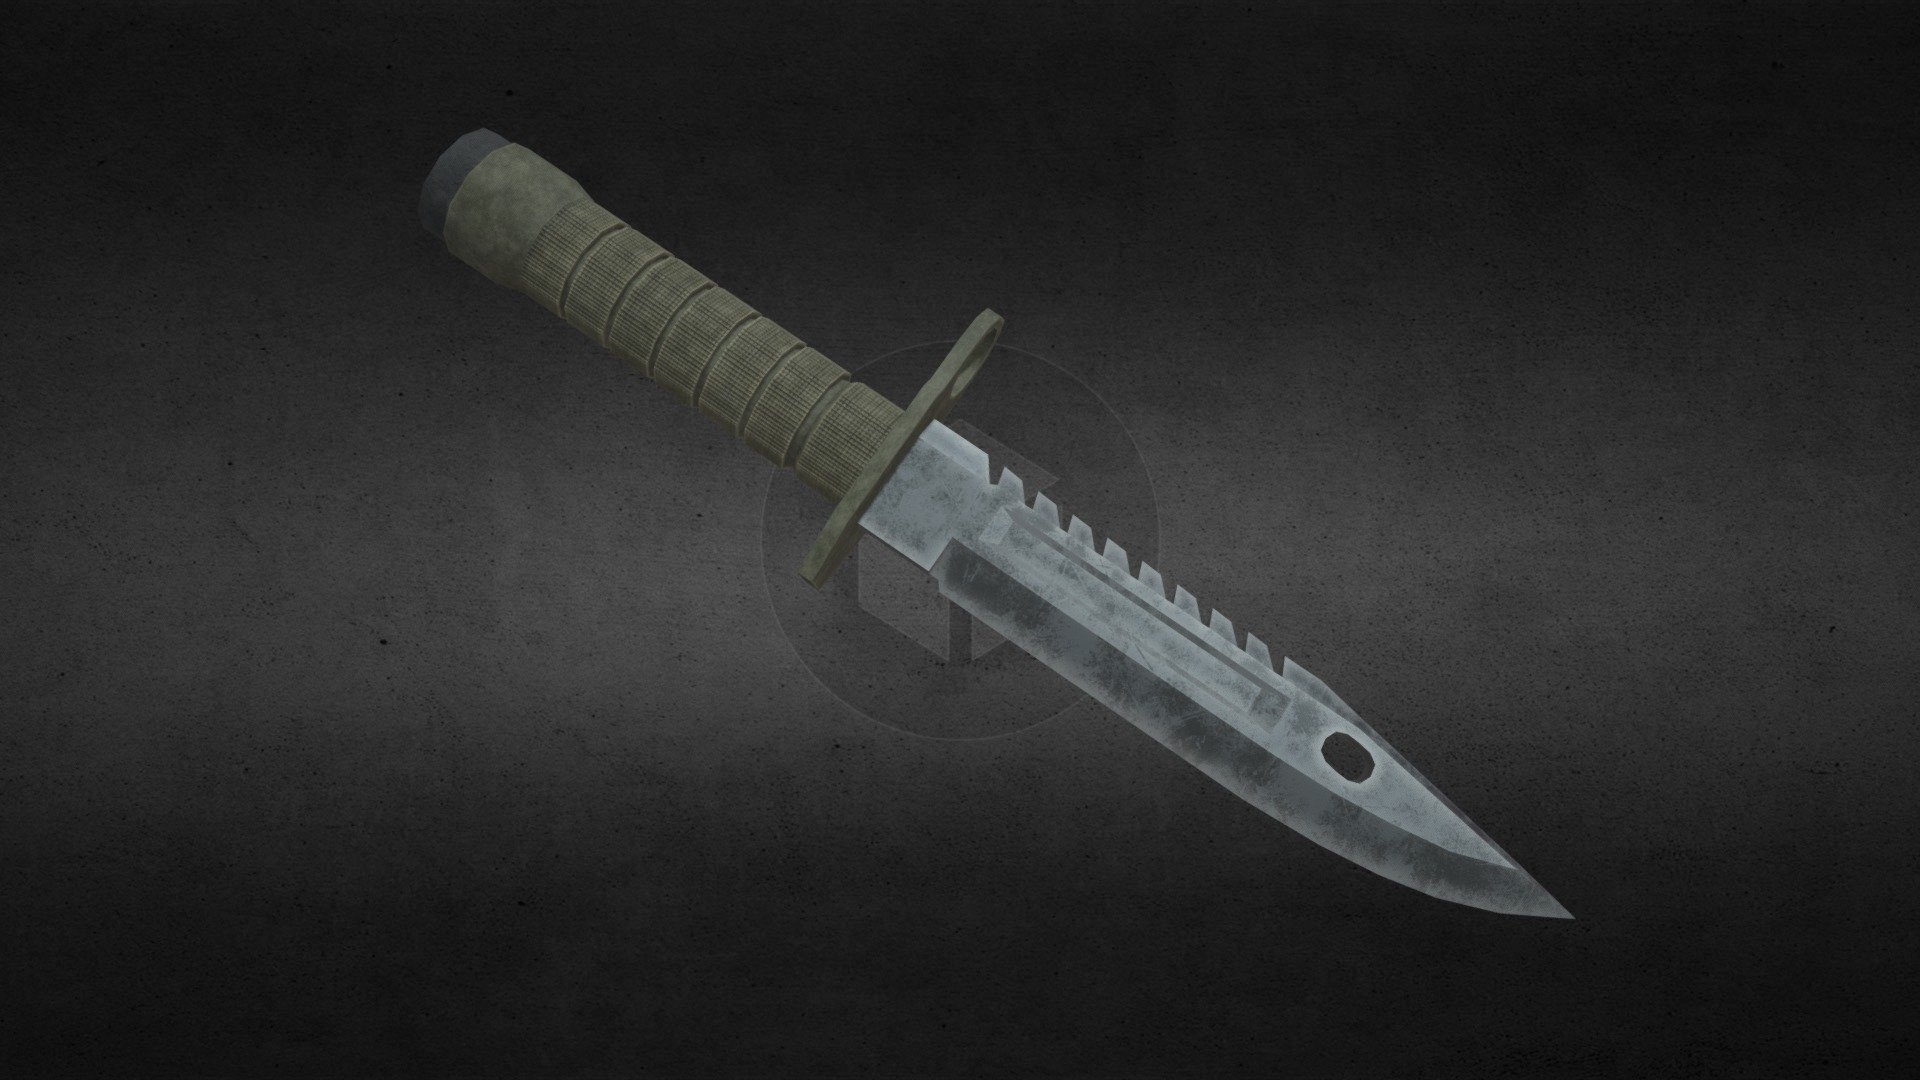 A combat knife based off the one Leon Kennedy uses in the recent Resident Evil 4 Remake. Made from scratch, I tried recreating the model and texture as accurate as I could get it to Capcom standards. This is more a practice run than an actual output for something truth be told, but maybe if I'm motivated I'll import it into a game like Fallout New Vegas or something.

I used four maps, a diffuse, roughness, normal and metallic map. They are all aptly sized 1K textures, and should be lightweight enough to be imported into a game engine should needed 3d model